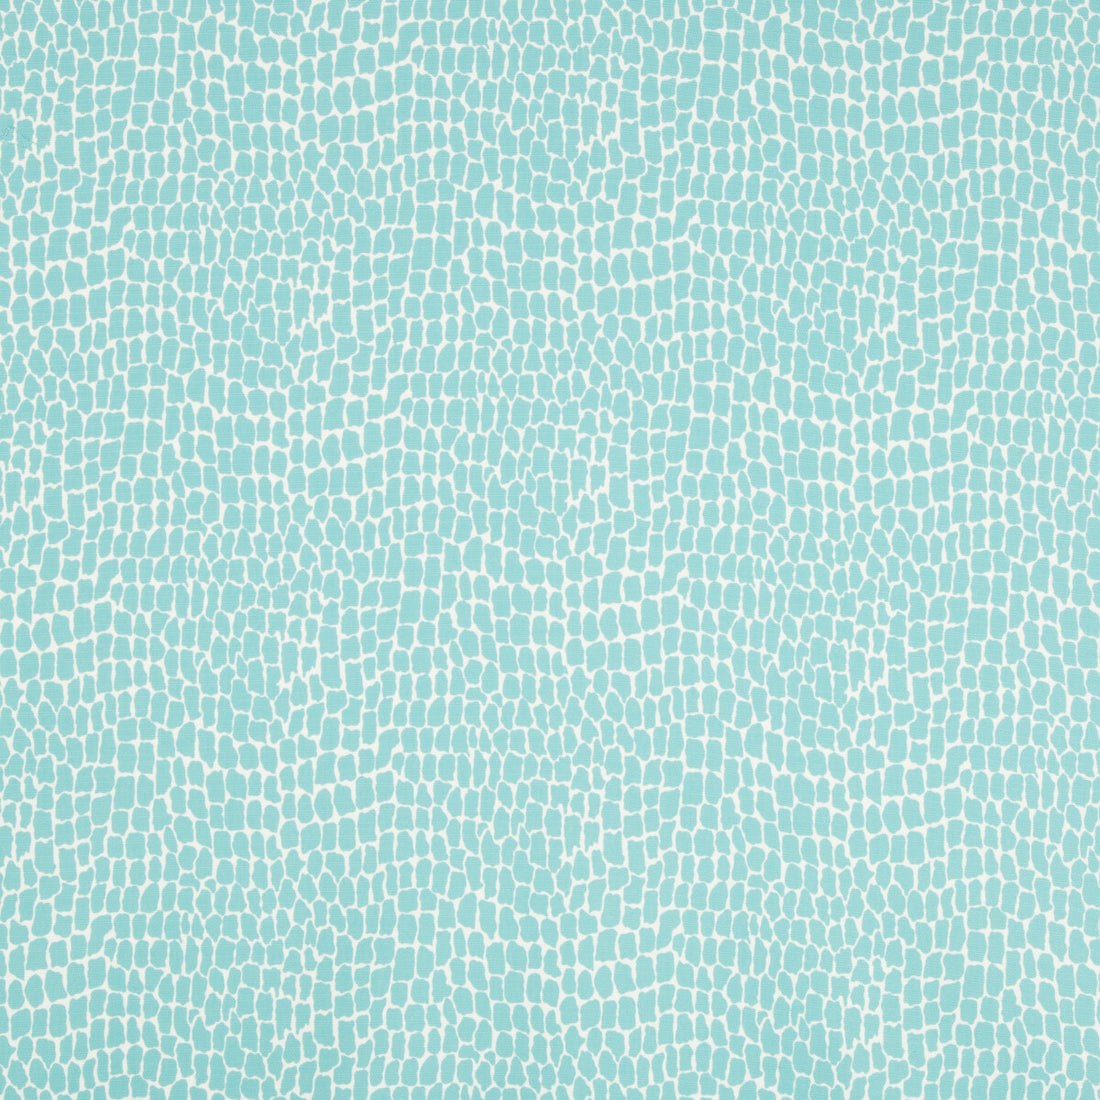 Nile Print fabric in aqua color - pattern 8017154.13.0 - by Brunschwig &amp; Fils in the En Vacances collection